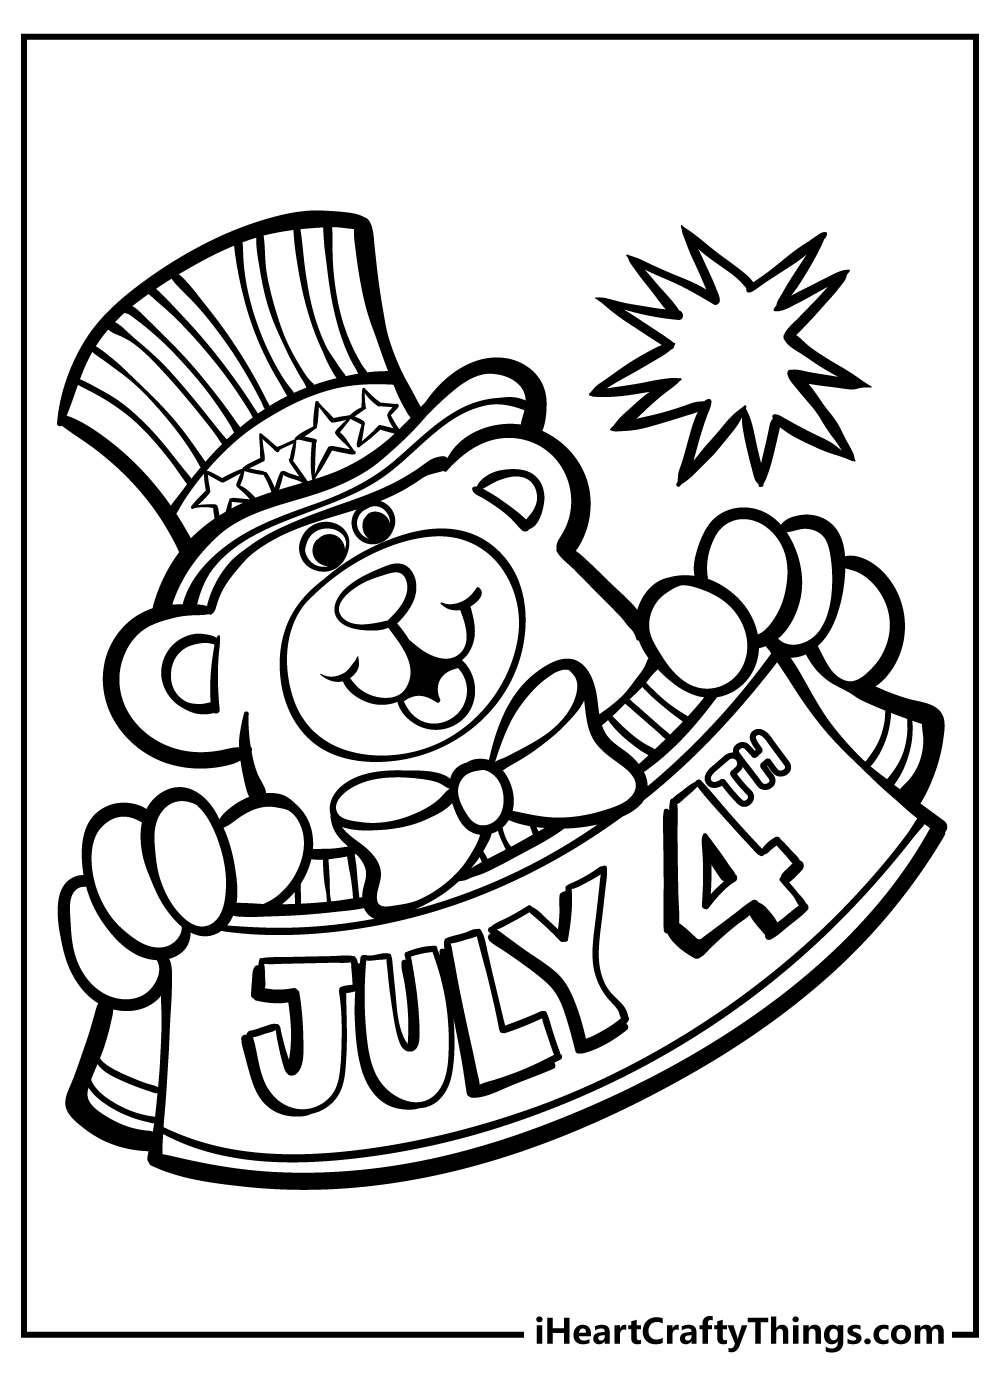 4th Of July Coloring Pages 100 Free Printables - Free Printable 4th of July Coloring Pages